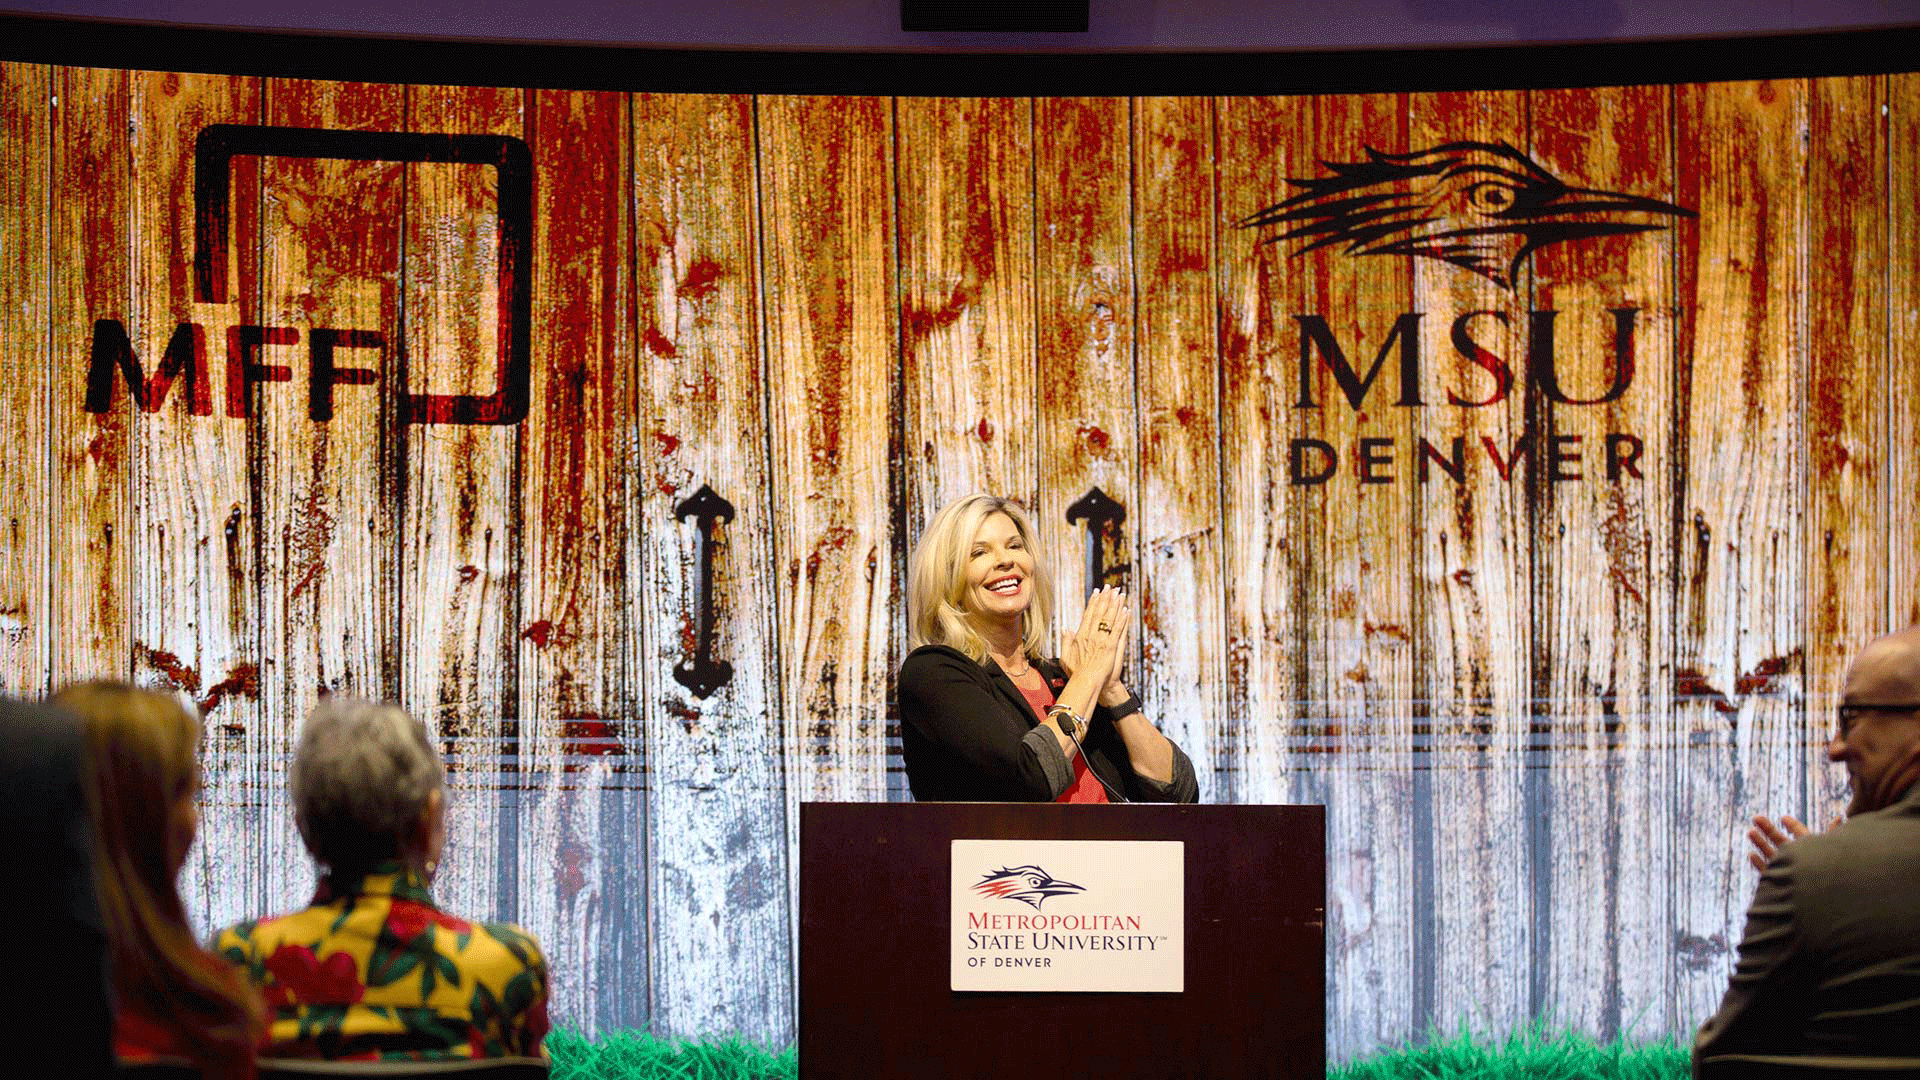 Carrie Morgridge, co-founder of the Morgridge Family Foundation, speaks during an event announcing the foundation's financial support for MSU Denver's Classroom to Career Hub.